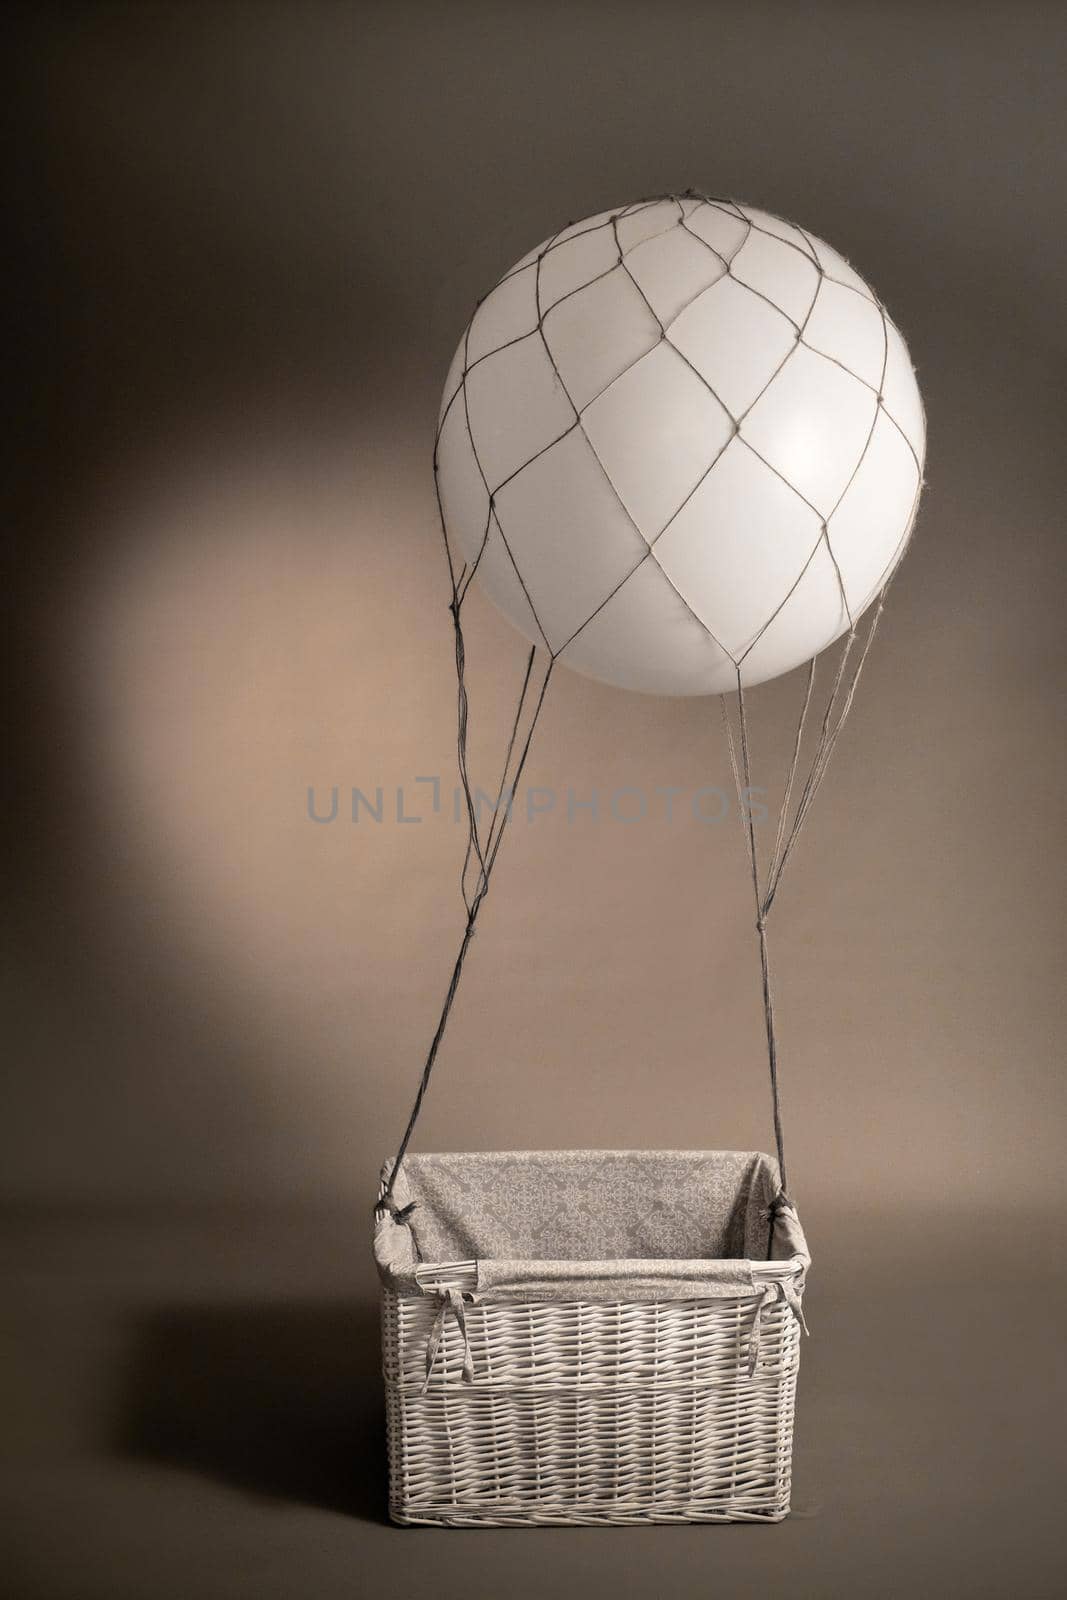 Balloon pilot for flying toy on gray background by Lobachad